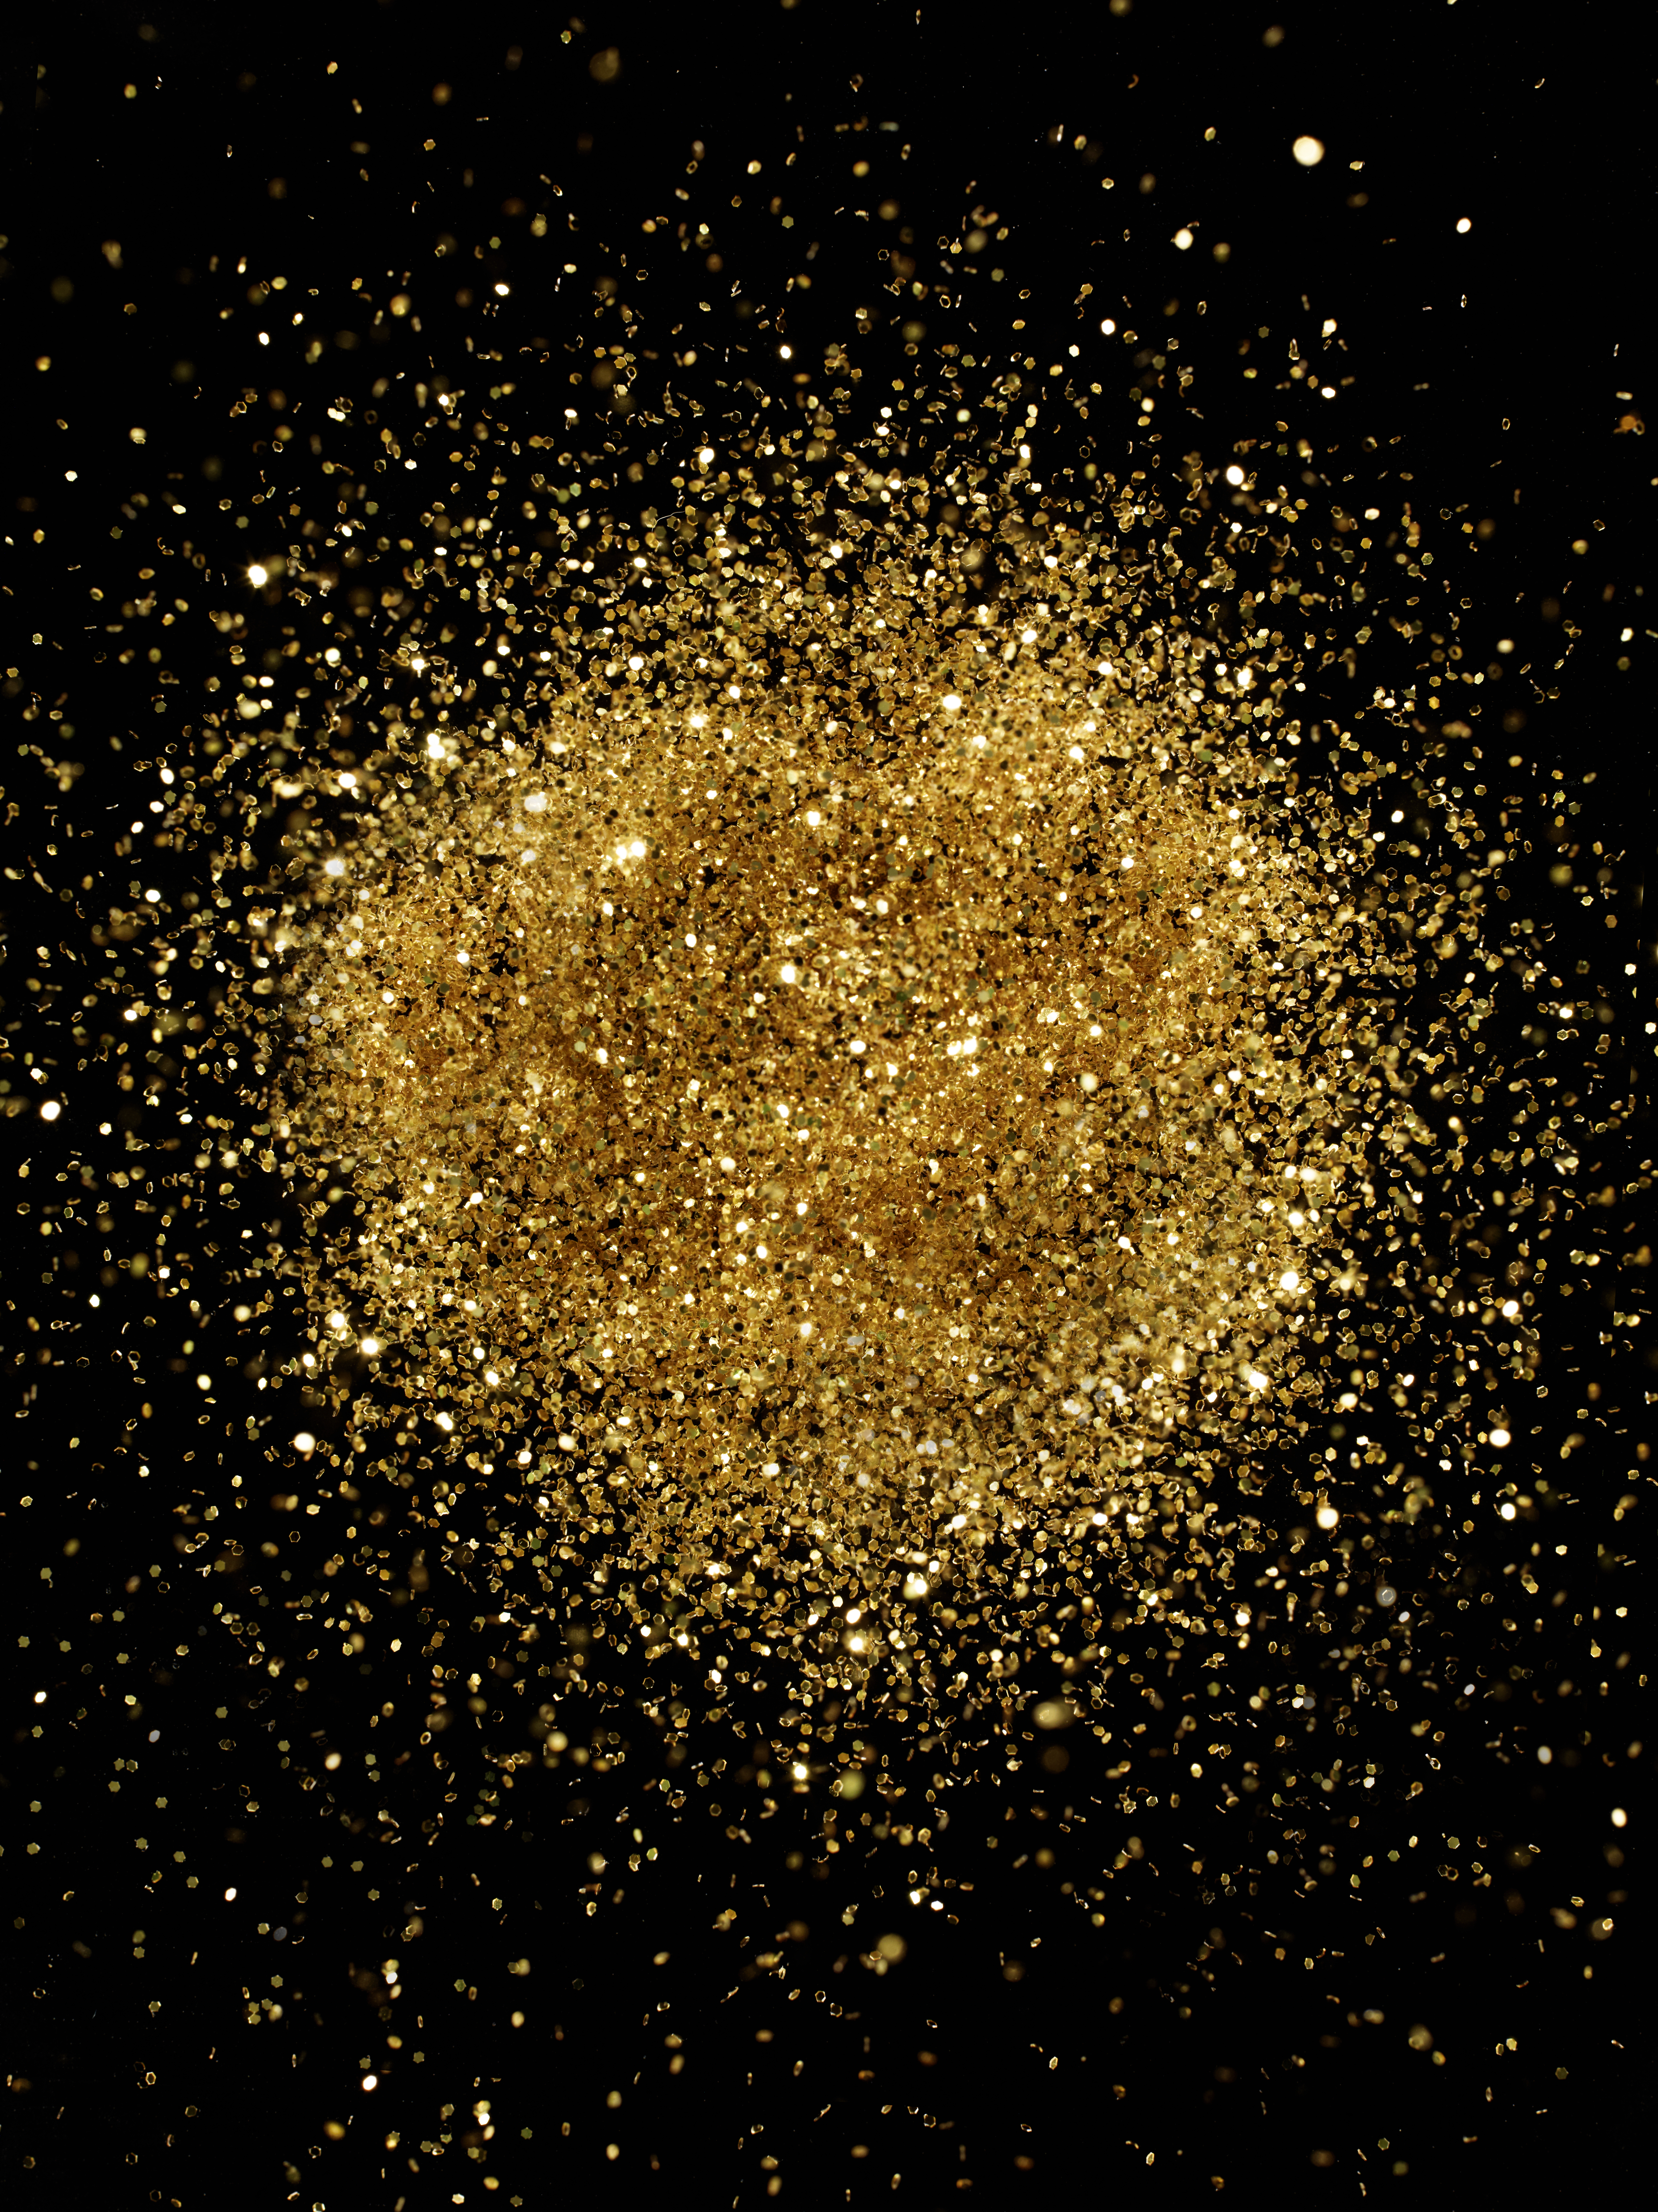 Gold glitter on a black background | Source: Getty Images